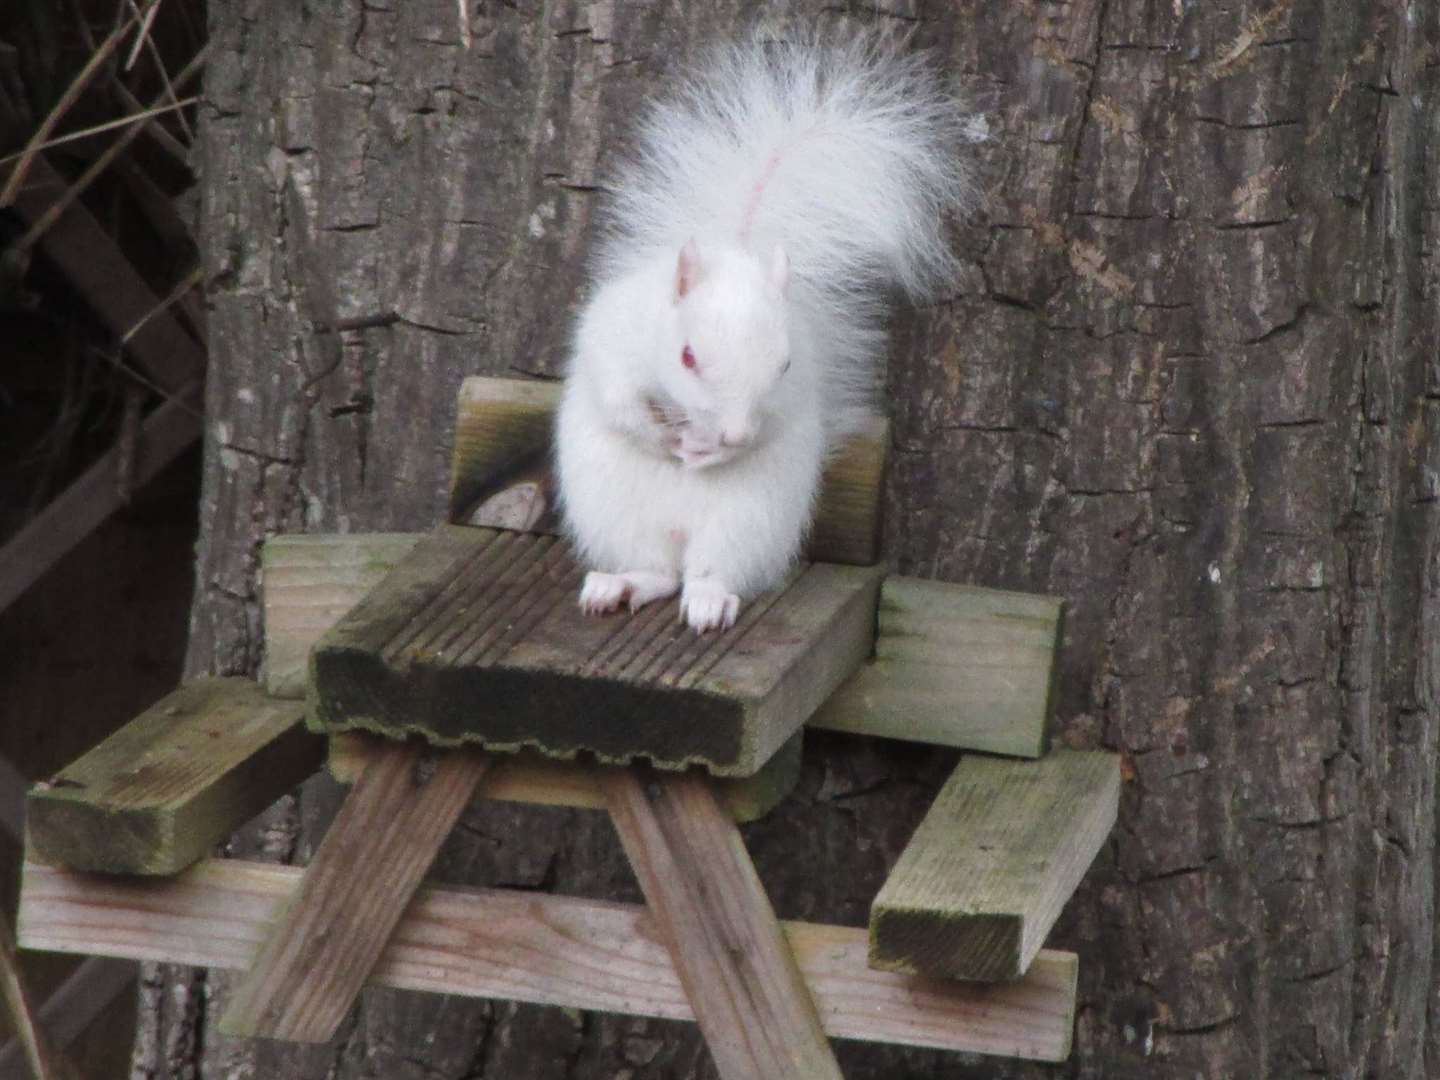 The white furred rodent was captured on camera on a feeding table